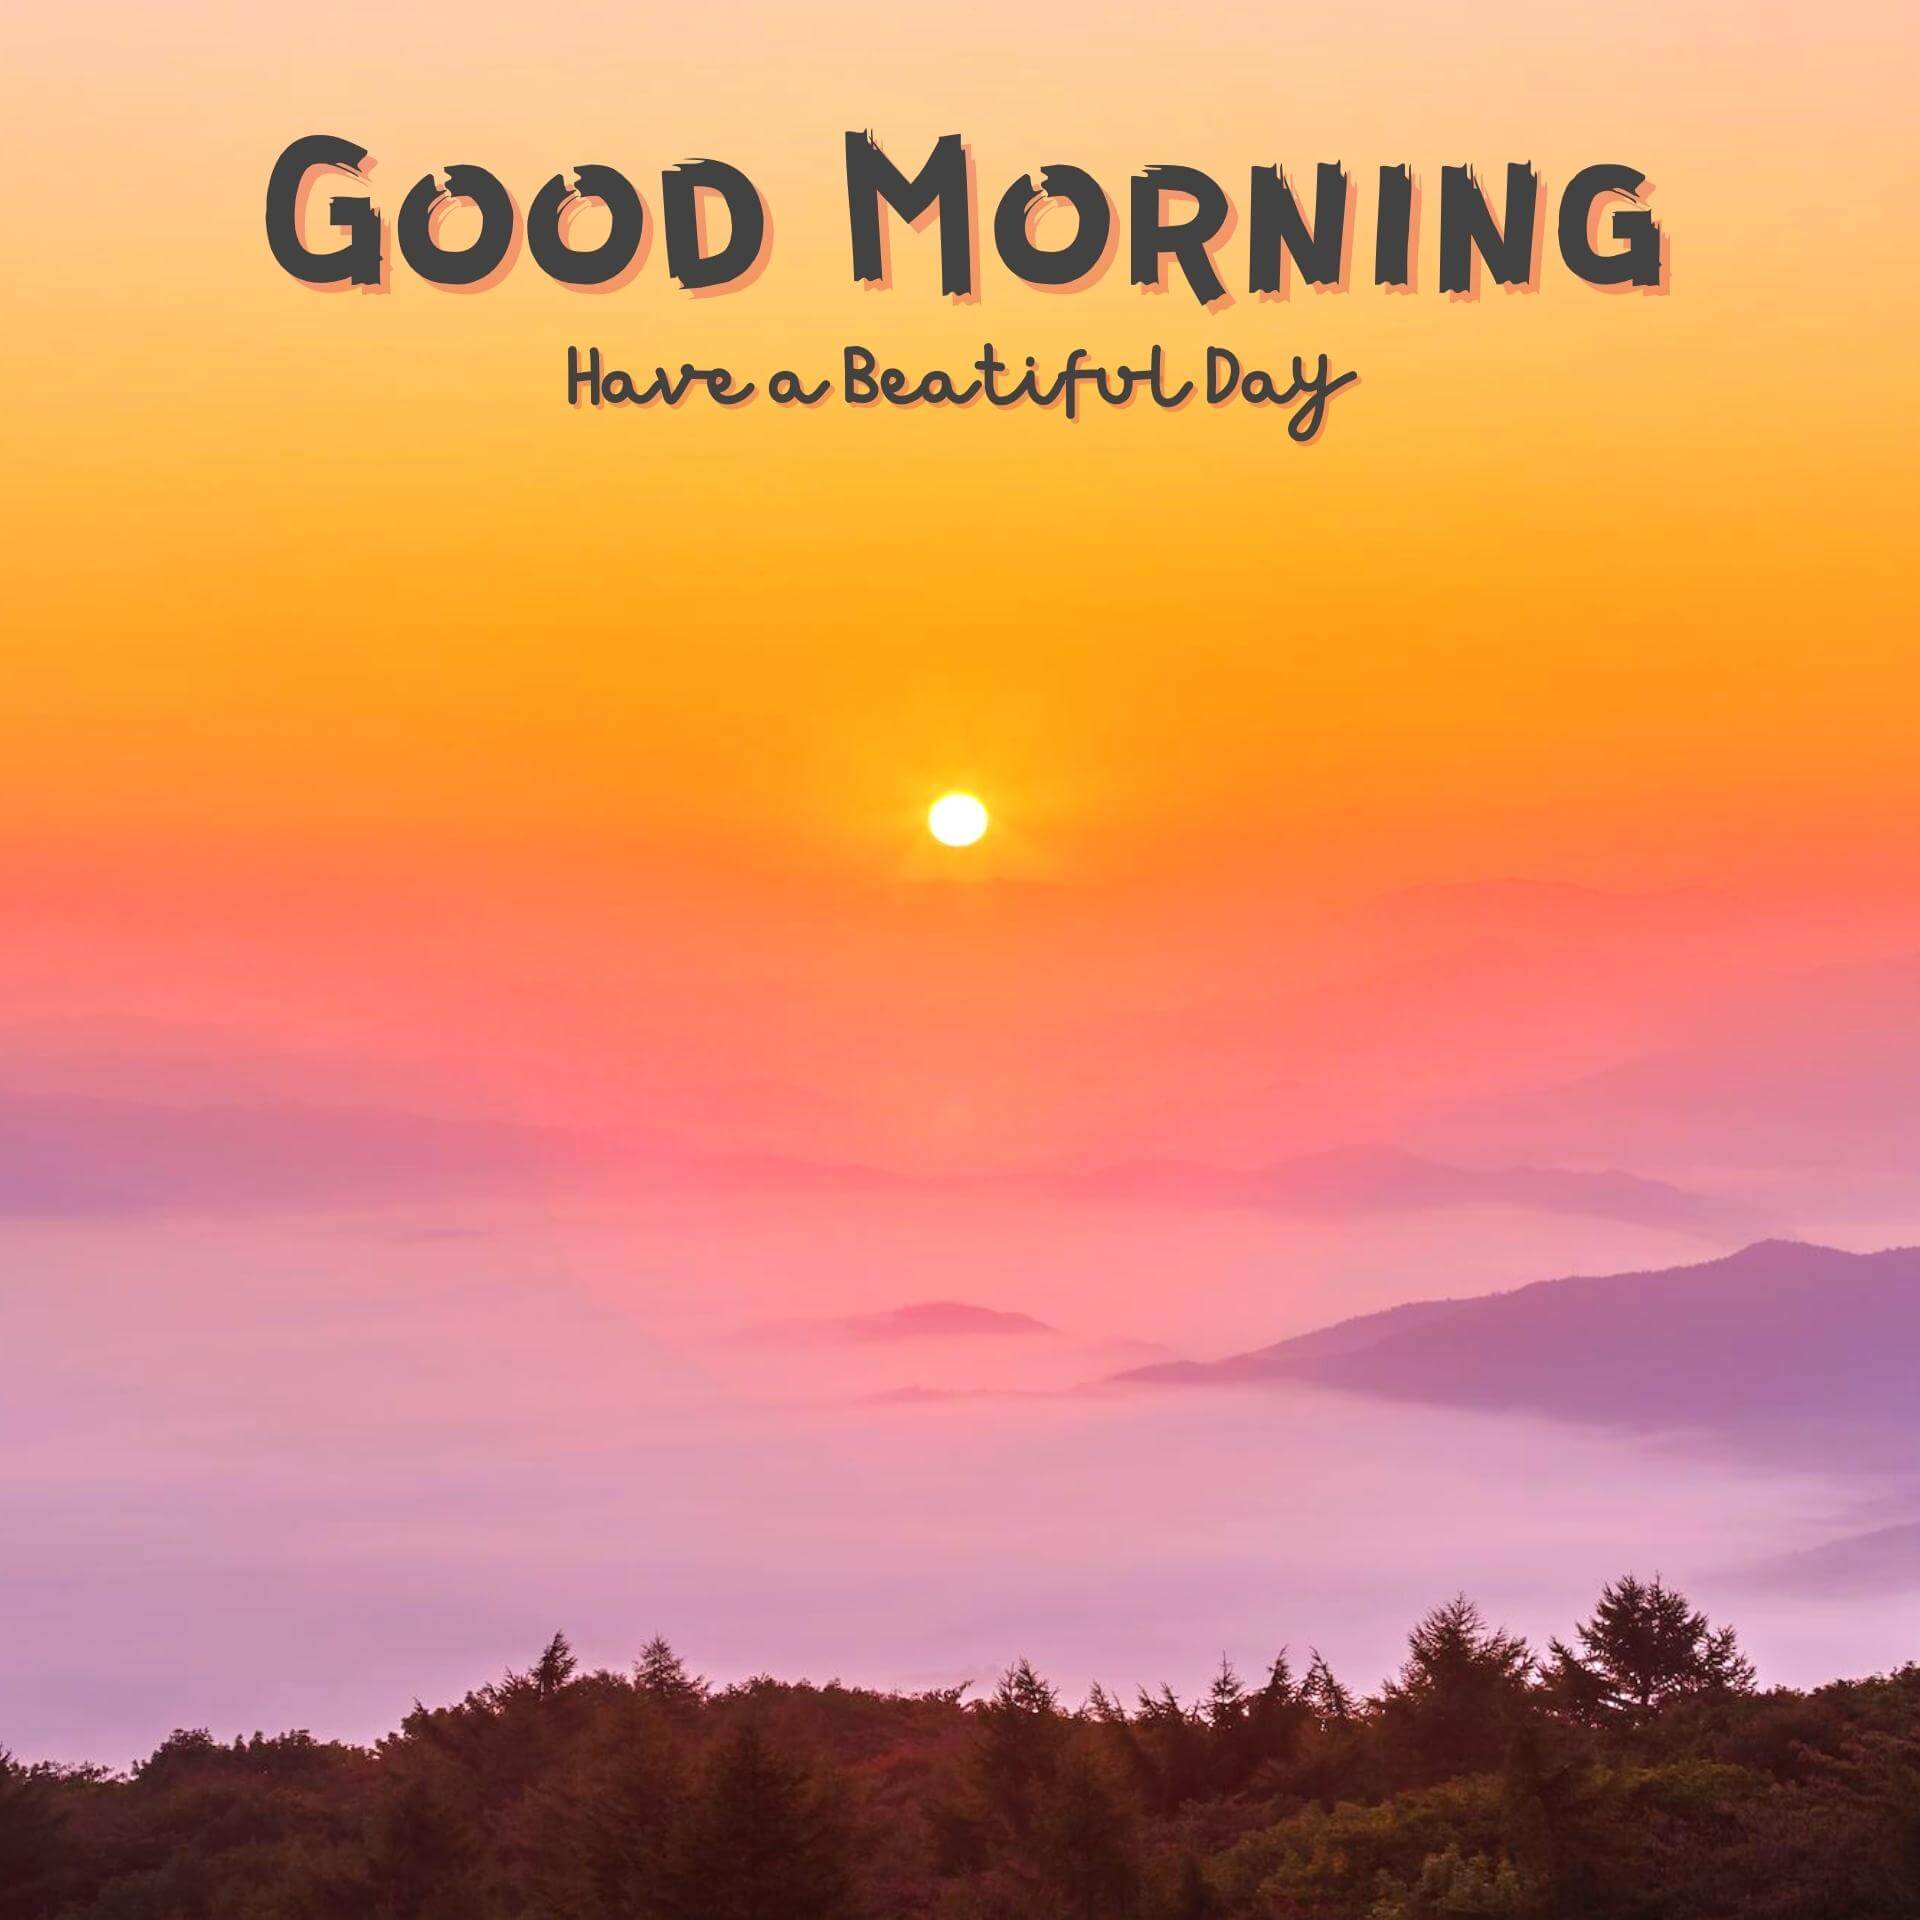 images of good morning free download